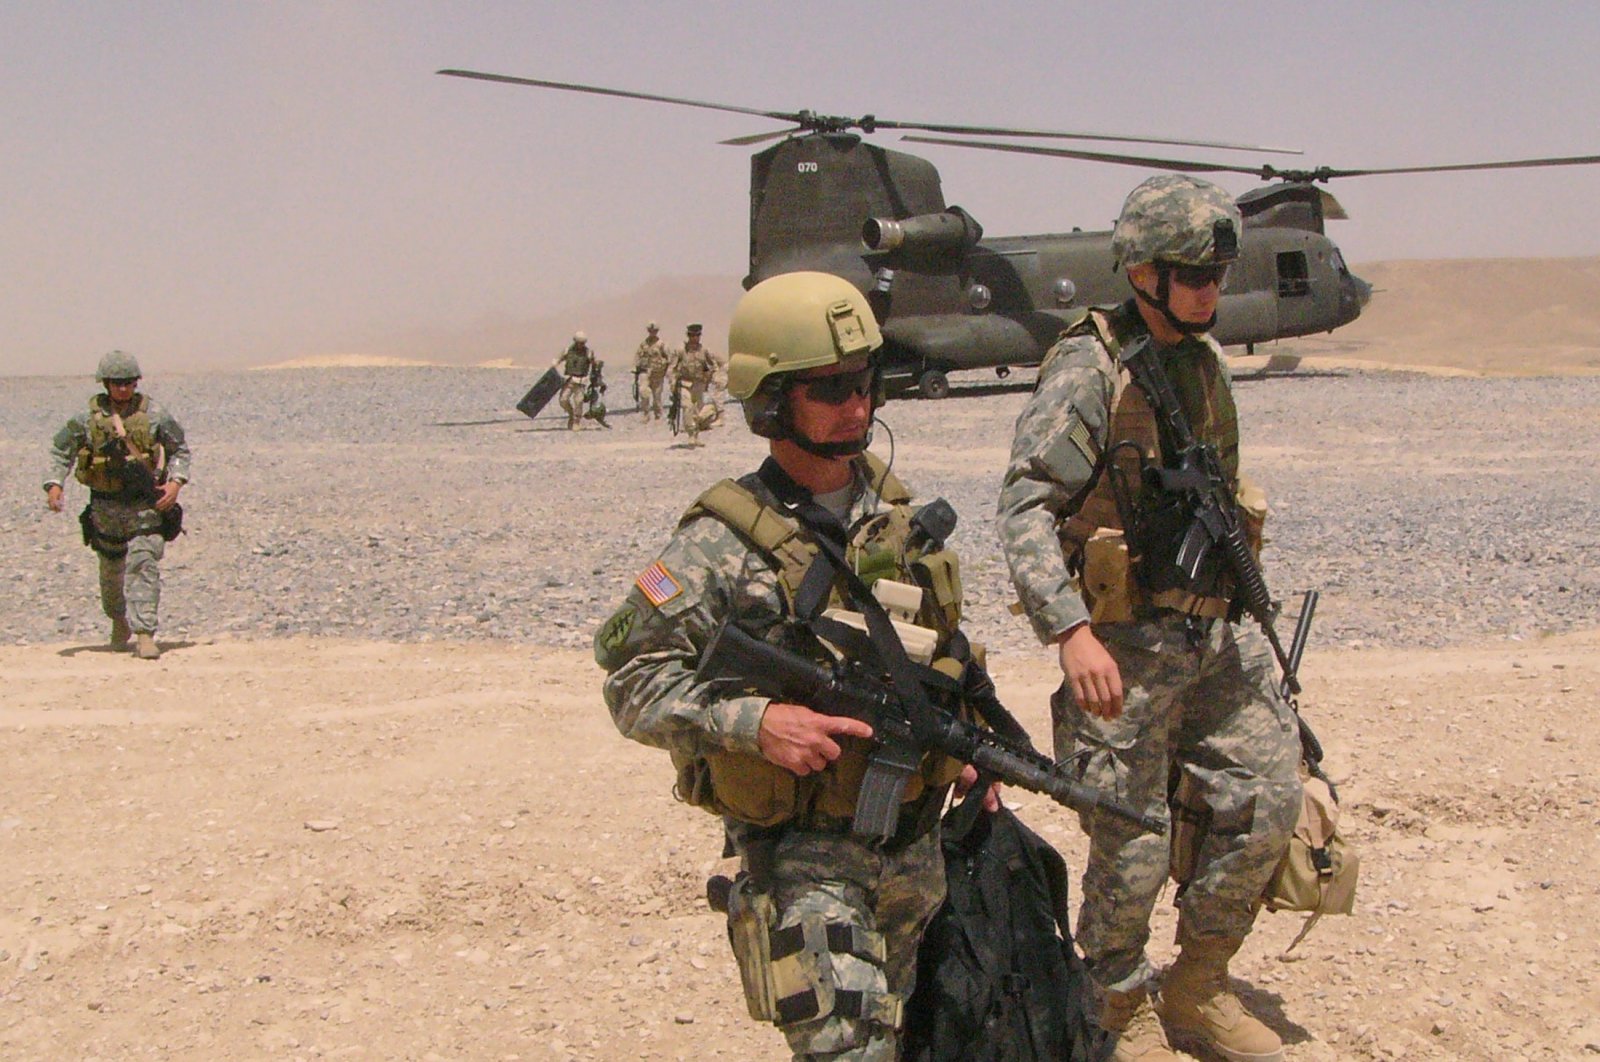 U.S. soldiers, with a Chinook helicopter in the background, return to their base after attending a local tribal council in Zabul province, south of Afghanistan, June 30, 2005. (Reuters File Photo)